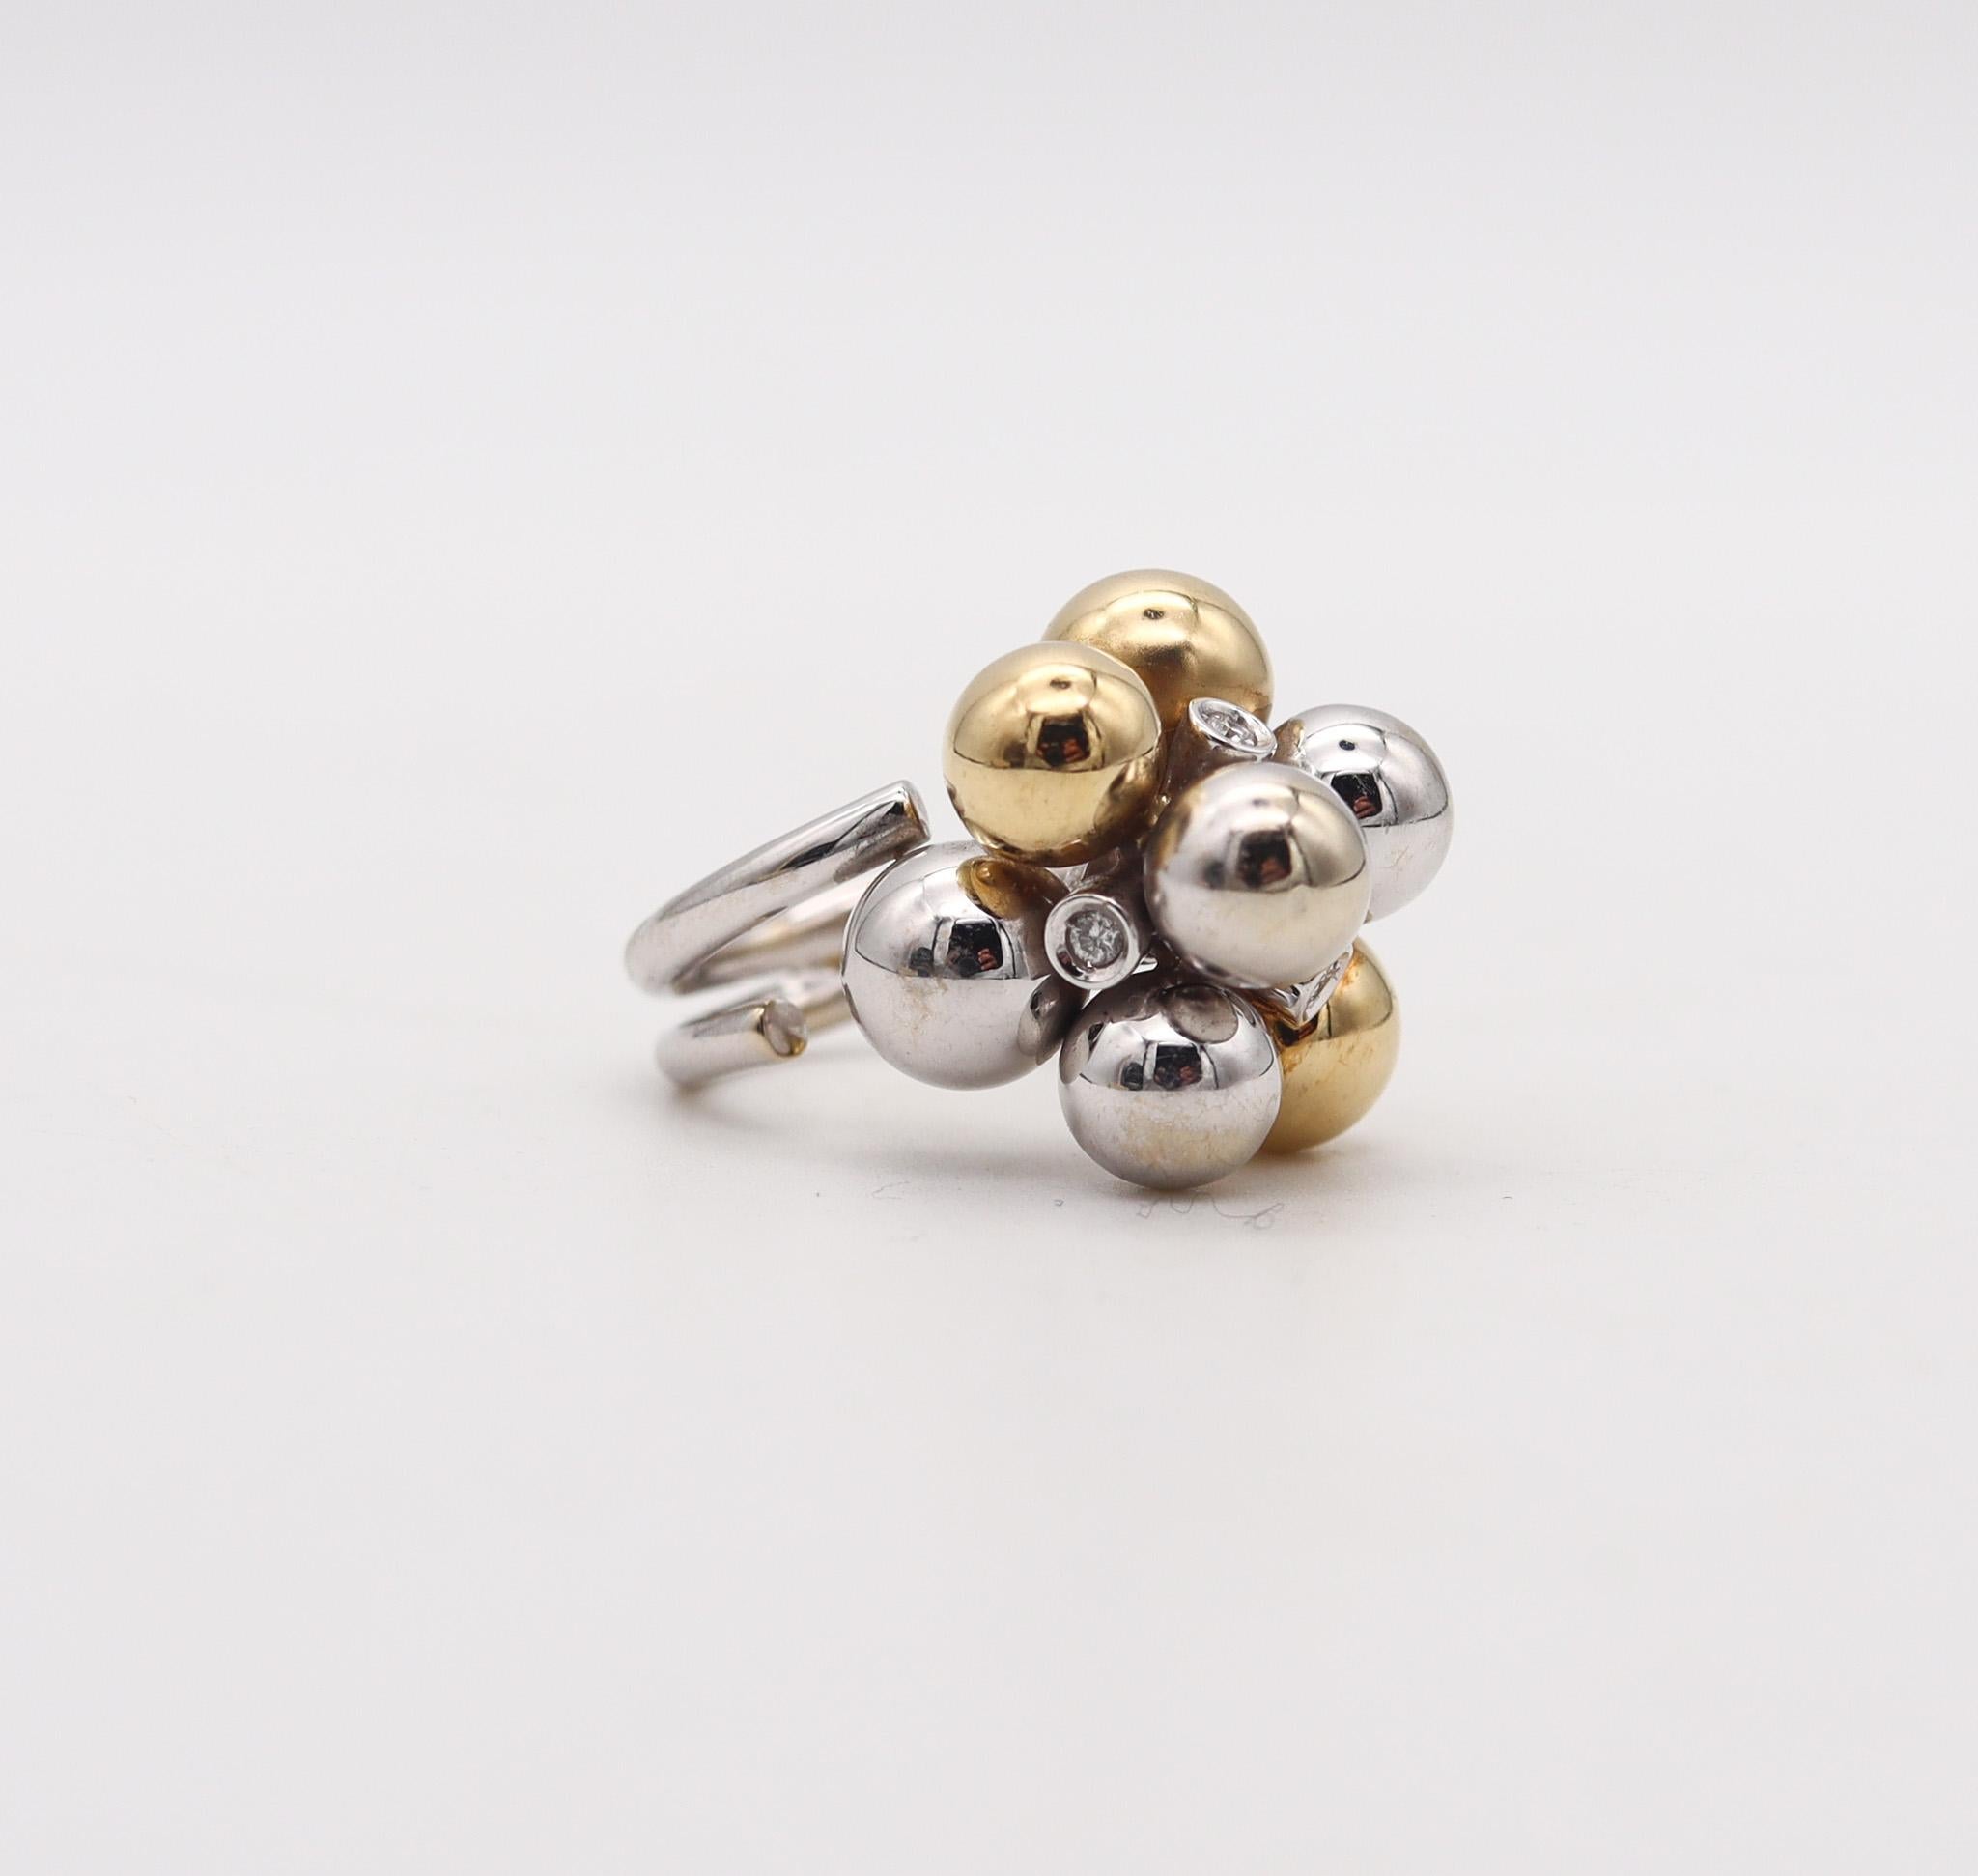 Cocktail ring designed by Bibigi Gioielli.

Beautiful bubbles cocktail ring, created in the city of Arezzo Italy at the jewelry atelier of Bibigi Gioielli. This modernist ring has been crafted in solid white and yellow gold of 18 karats with high